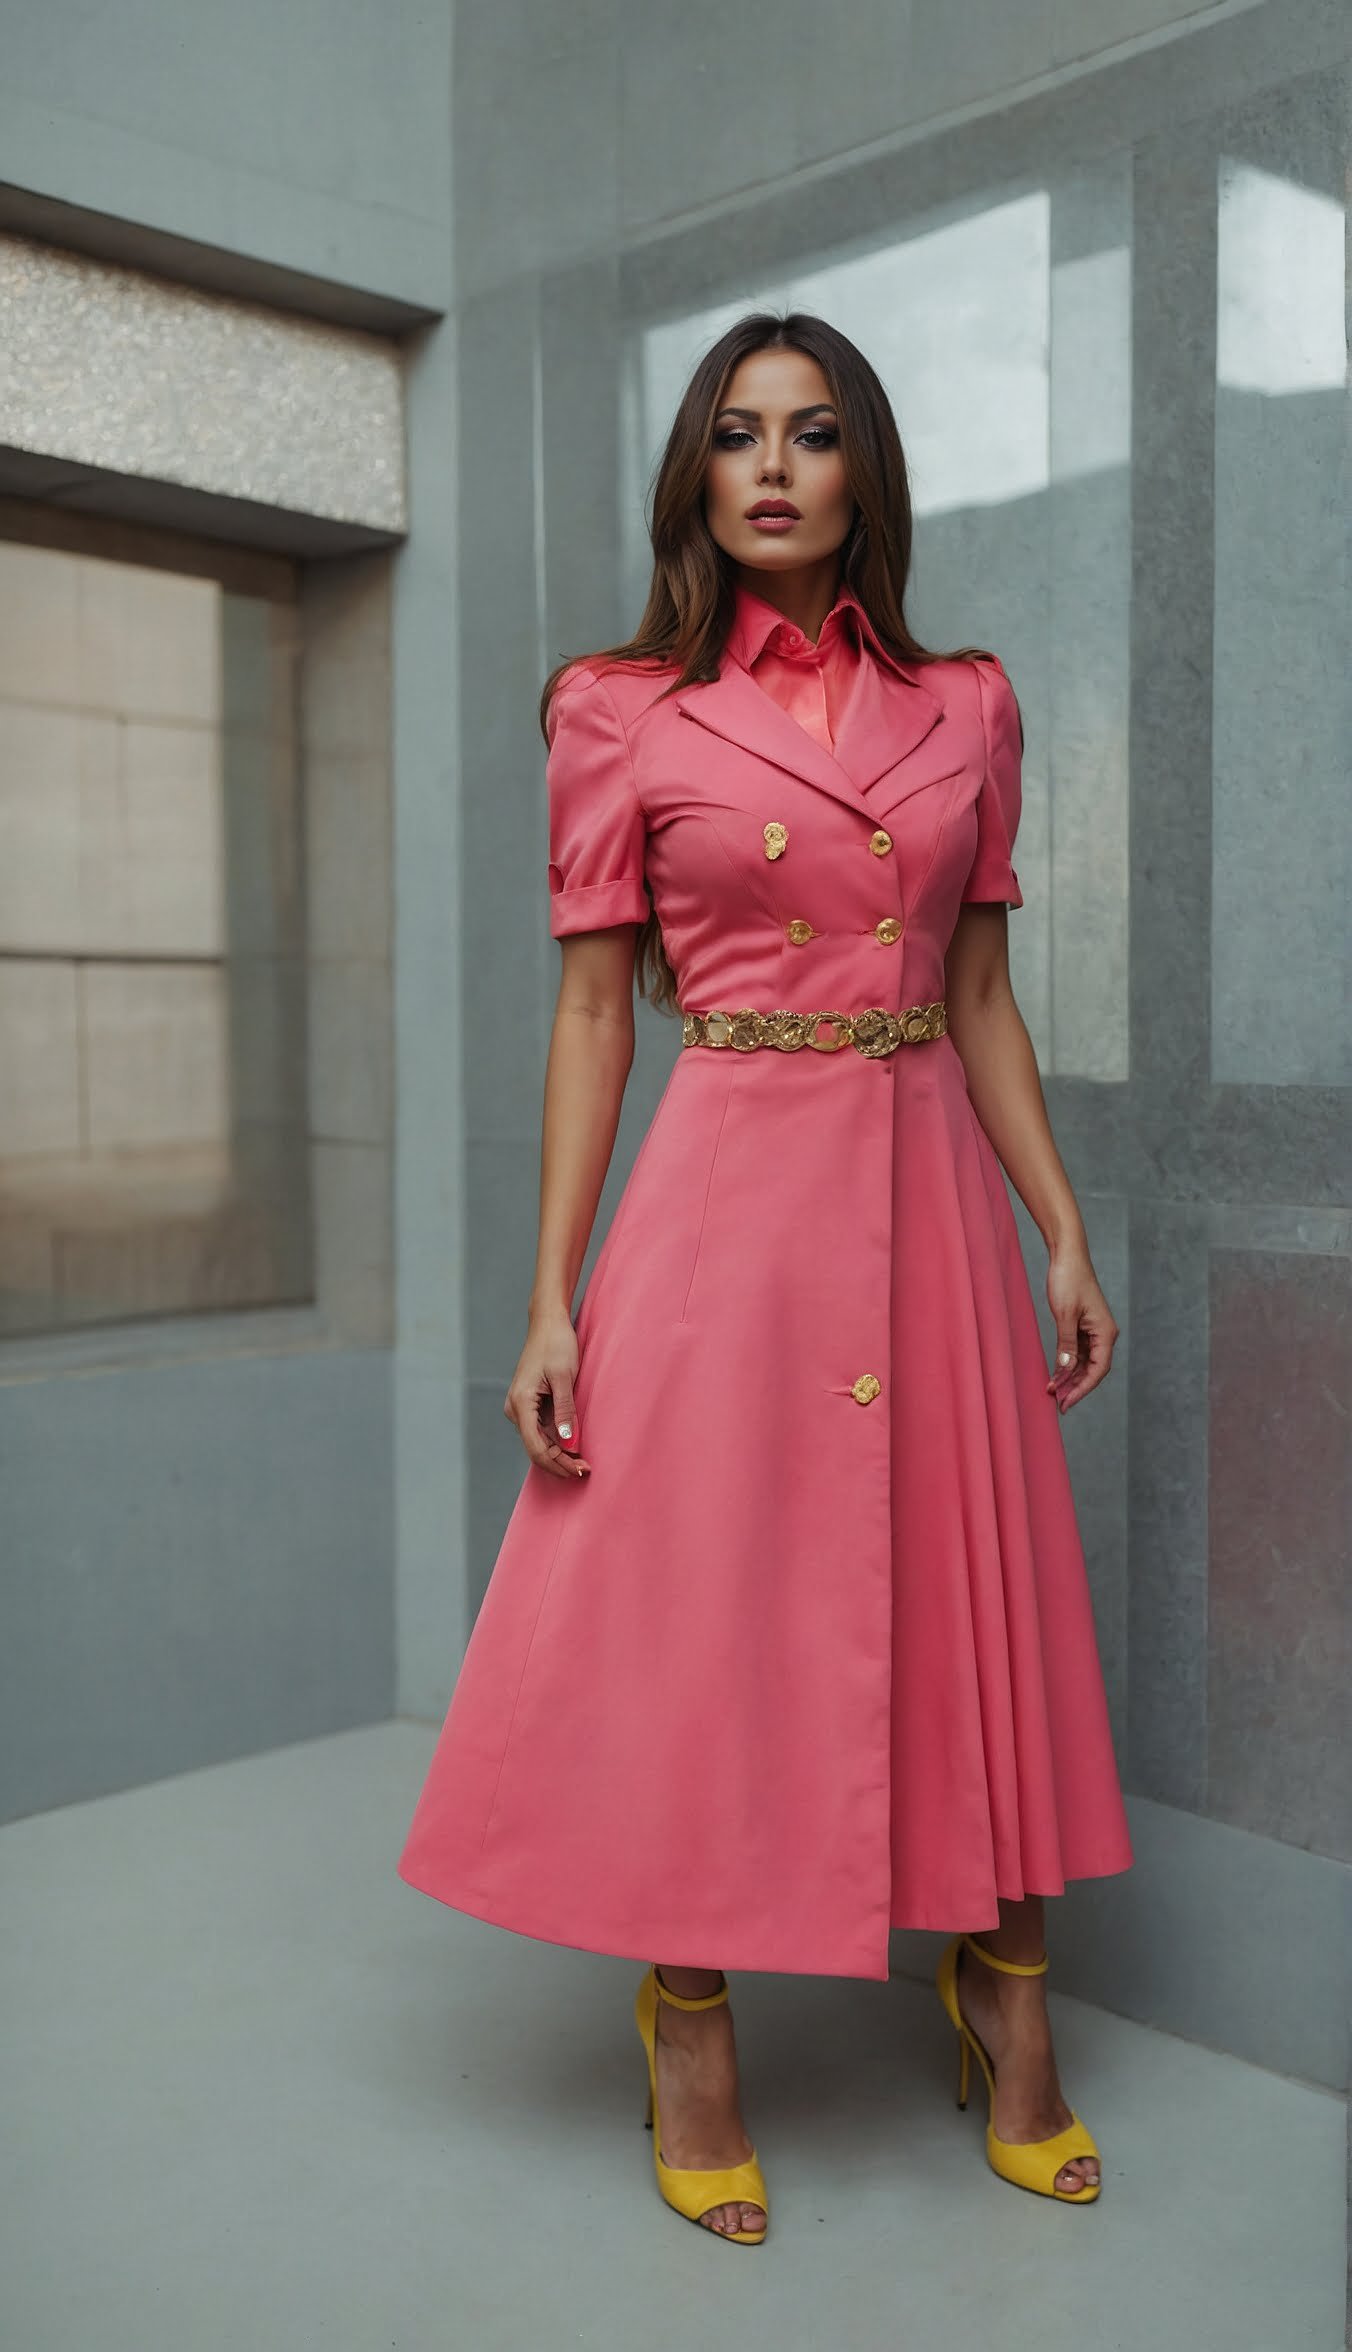 Retro Romance - Pink Midi Shirt Dress with Golden Accents for a Vintage Twist